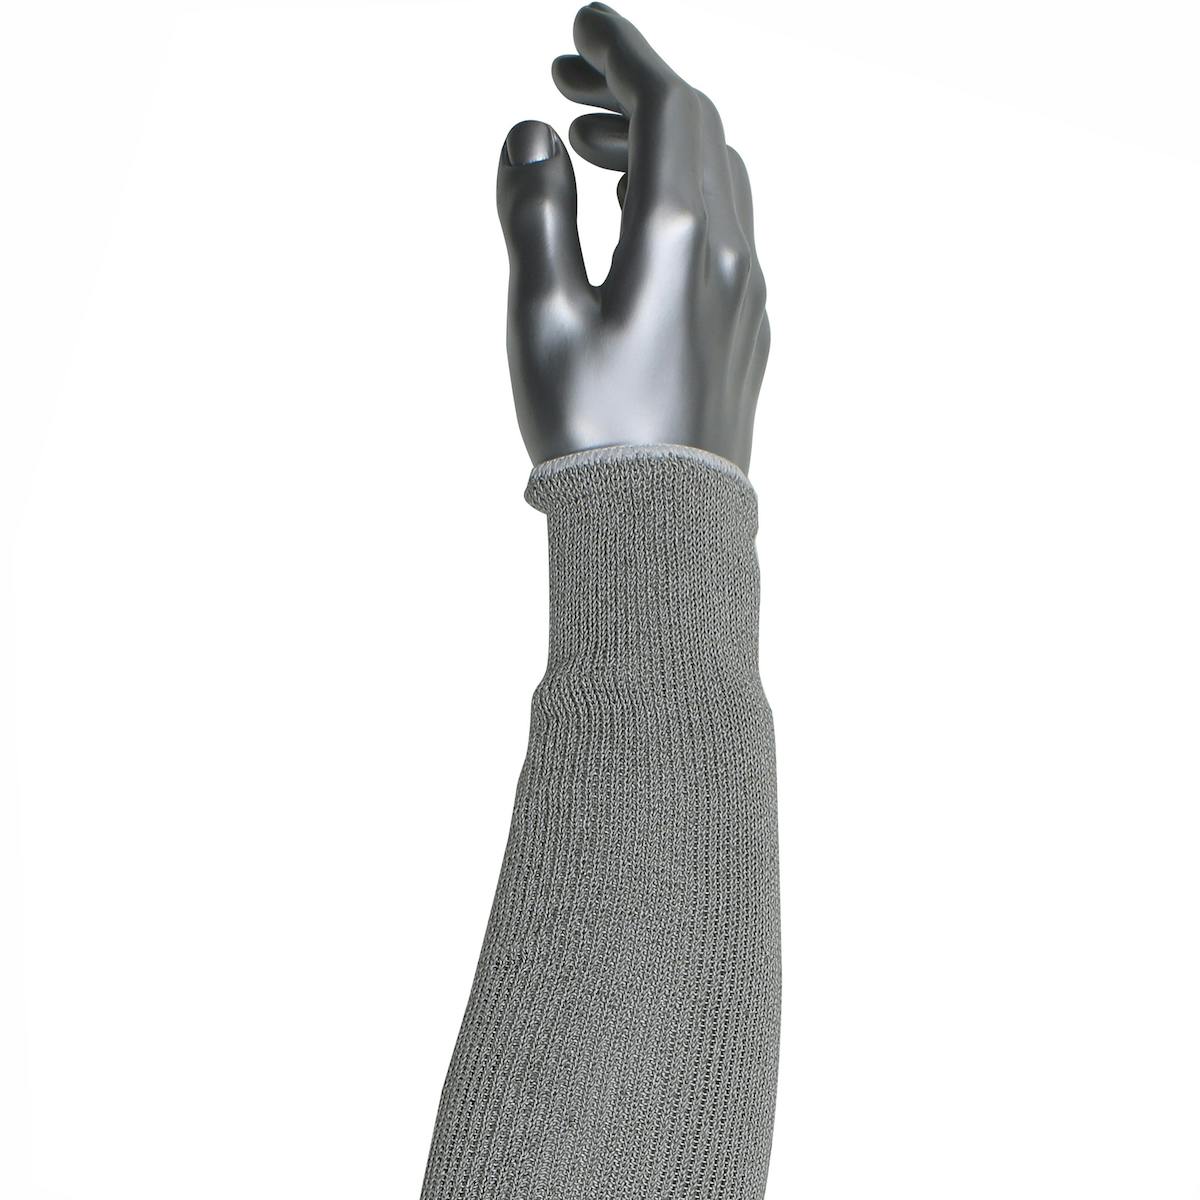 Single-Ply HPPE / Steel Blended Sleeve with Antimicrobial Fibers, Gray (CS7LGY-AC) - 22